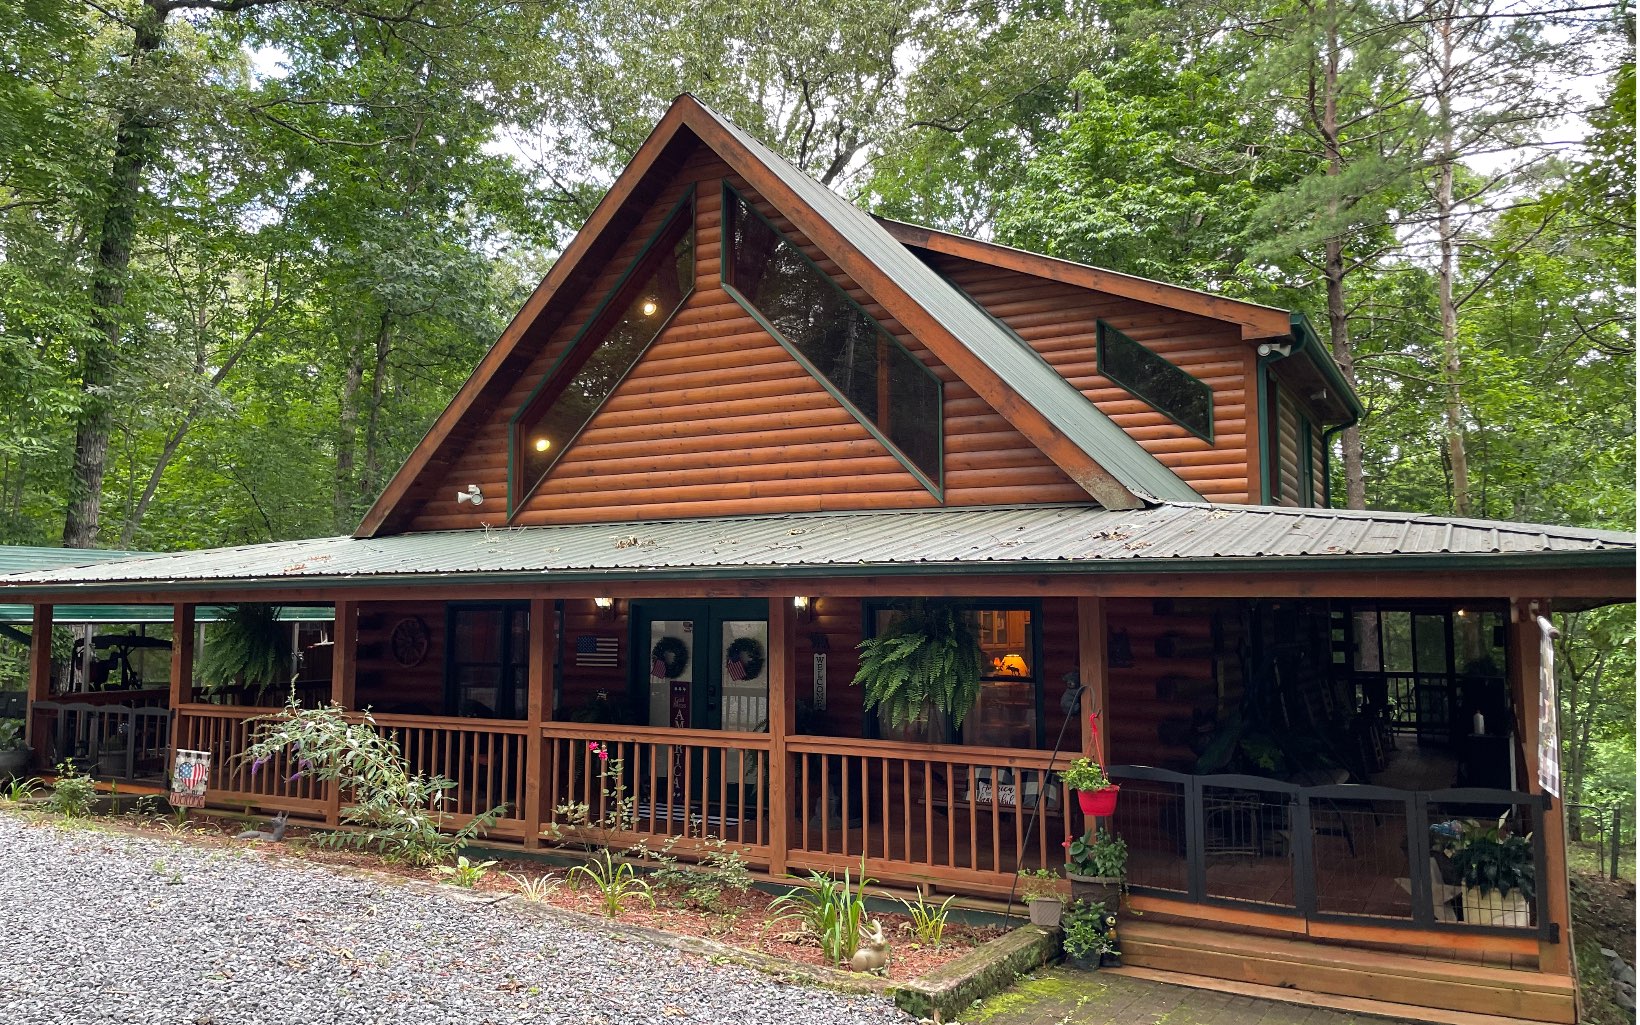 This cabin has awesome short-term rental potential. It has deeded access to Fightingtown Creek with its premiere trout fishing location in North Georgia -it has it all. It has newer stainless appliances in a massive kitchen, fiber optic super high speed internet, newer HVAC system, and beautiful wrap around porch with hot tub. The newly built fire pit area has plenty of space for entertaining and a fenced in backyard for your pets. The trout shack is perfect for any fly fisherman and has electricity connected. There is even an extra storage shed. This cabin provides a safe room with hidden access. The close proximity between historic downtown Blue Ridge and McCaysville offers an easy reach for shopping yet still secluded and tucked away in the woods. Other outdoor adventures close by include Lake Blue Ridge, Toccoa River, unlimited hiking, biking and fishing.